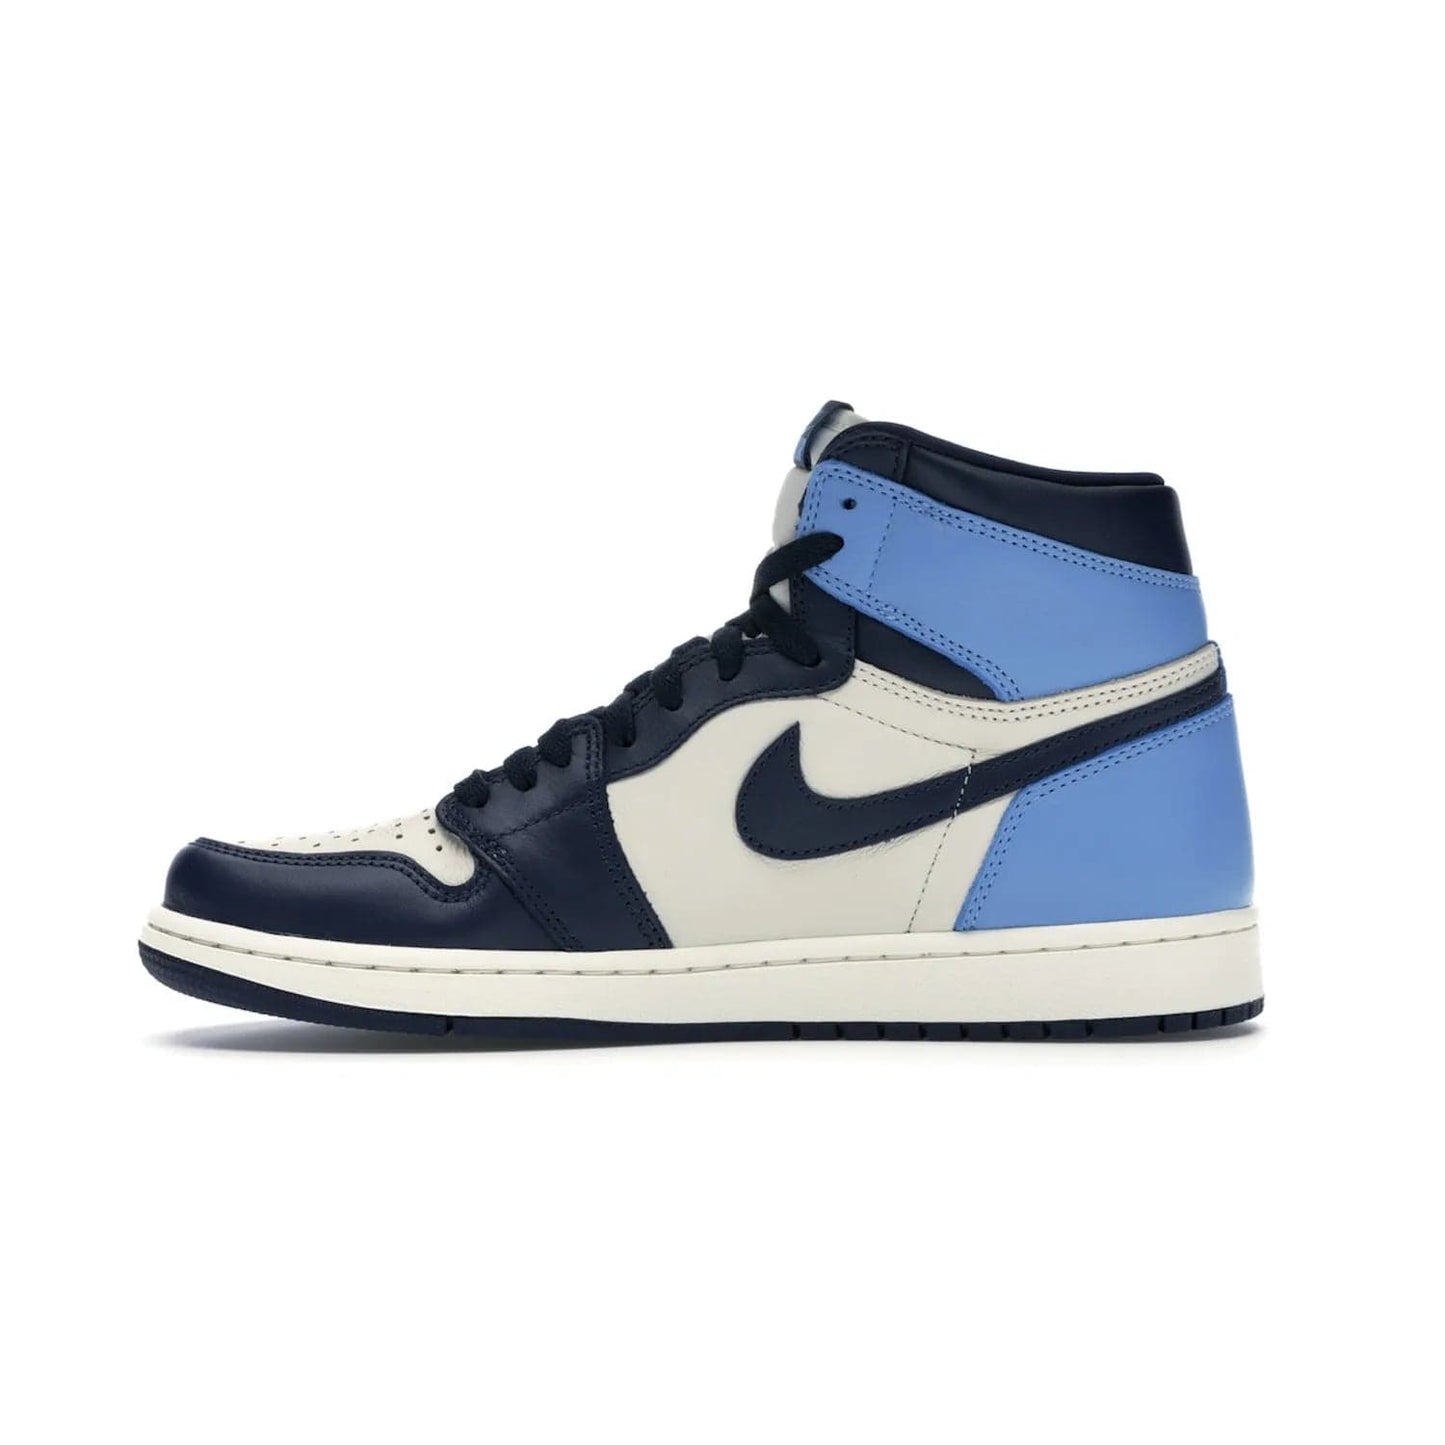 Jordan 1 Retro High Obsidian UNC - Image 19 - Only at www.BallersClubKickz.com - Bring a timeless classic to your wardrobe with the Air Jordan 1 Retro High "Obsidian/University Blue”. A full leather upper combines Obsidian and University Blue detailing for a retro Jordan style. Stitched Jumpman logo pays tribute to UNC. Experience classic style with a timeless sneaker.